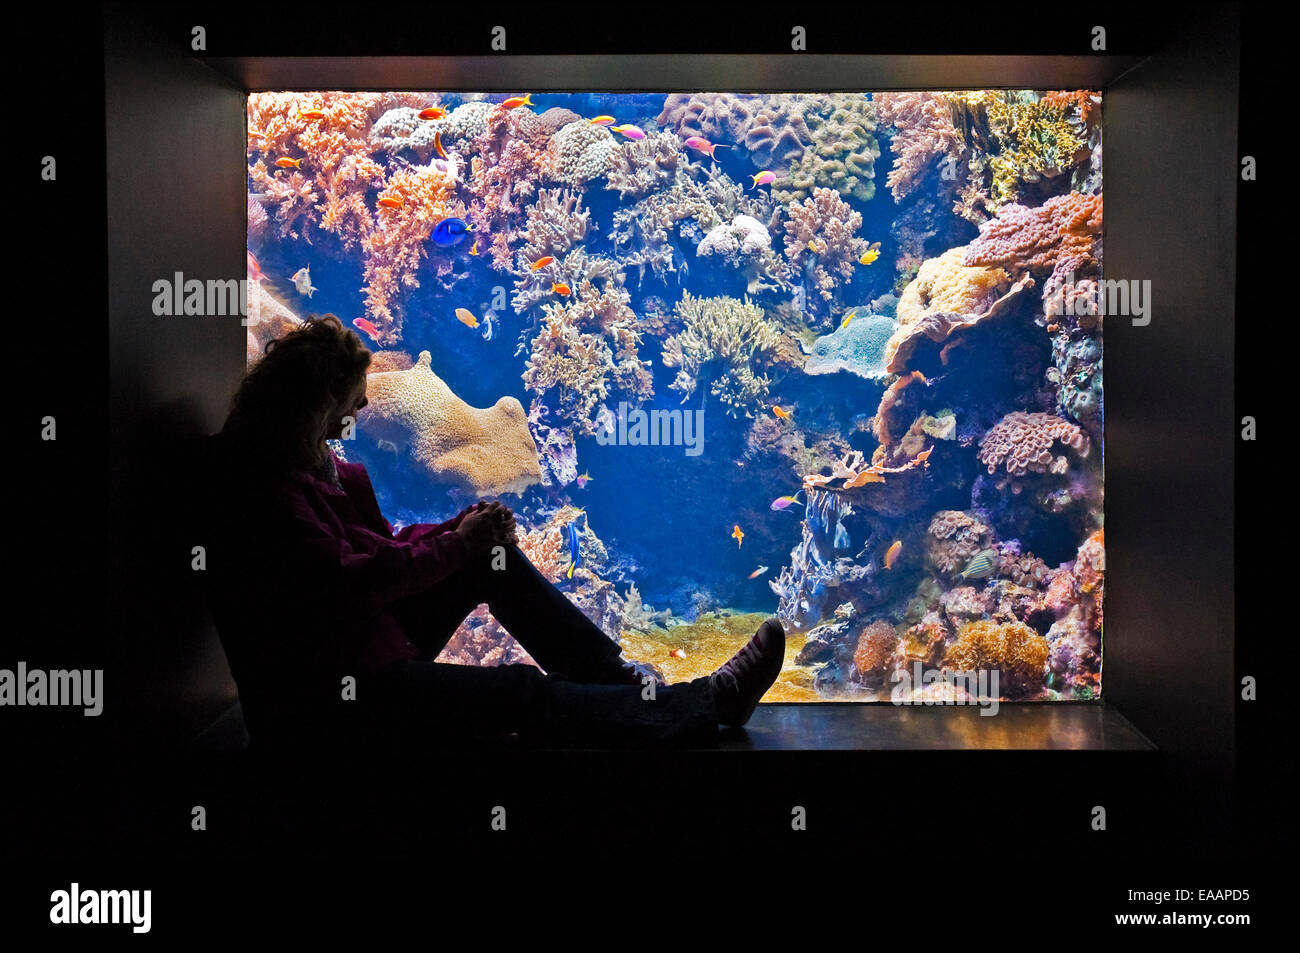 Horizontal portrait of a tourist looking at tropical fish in an aquarium. Stock Photo